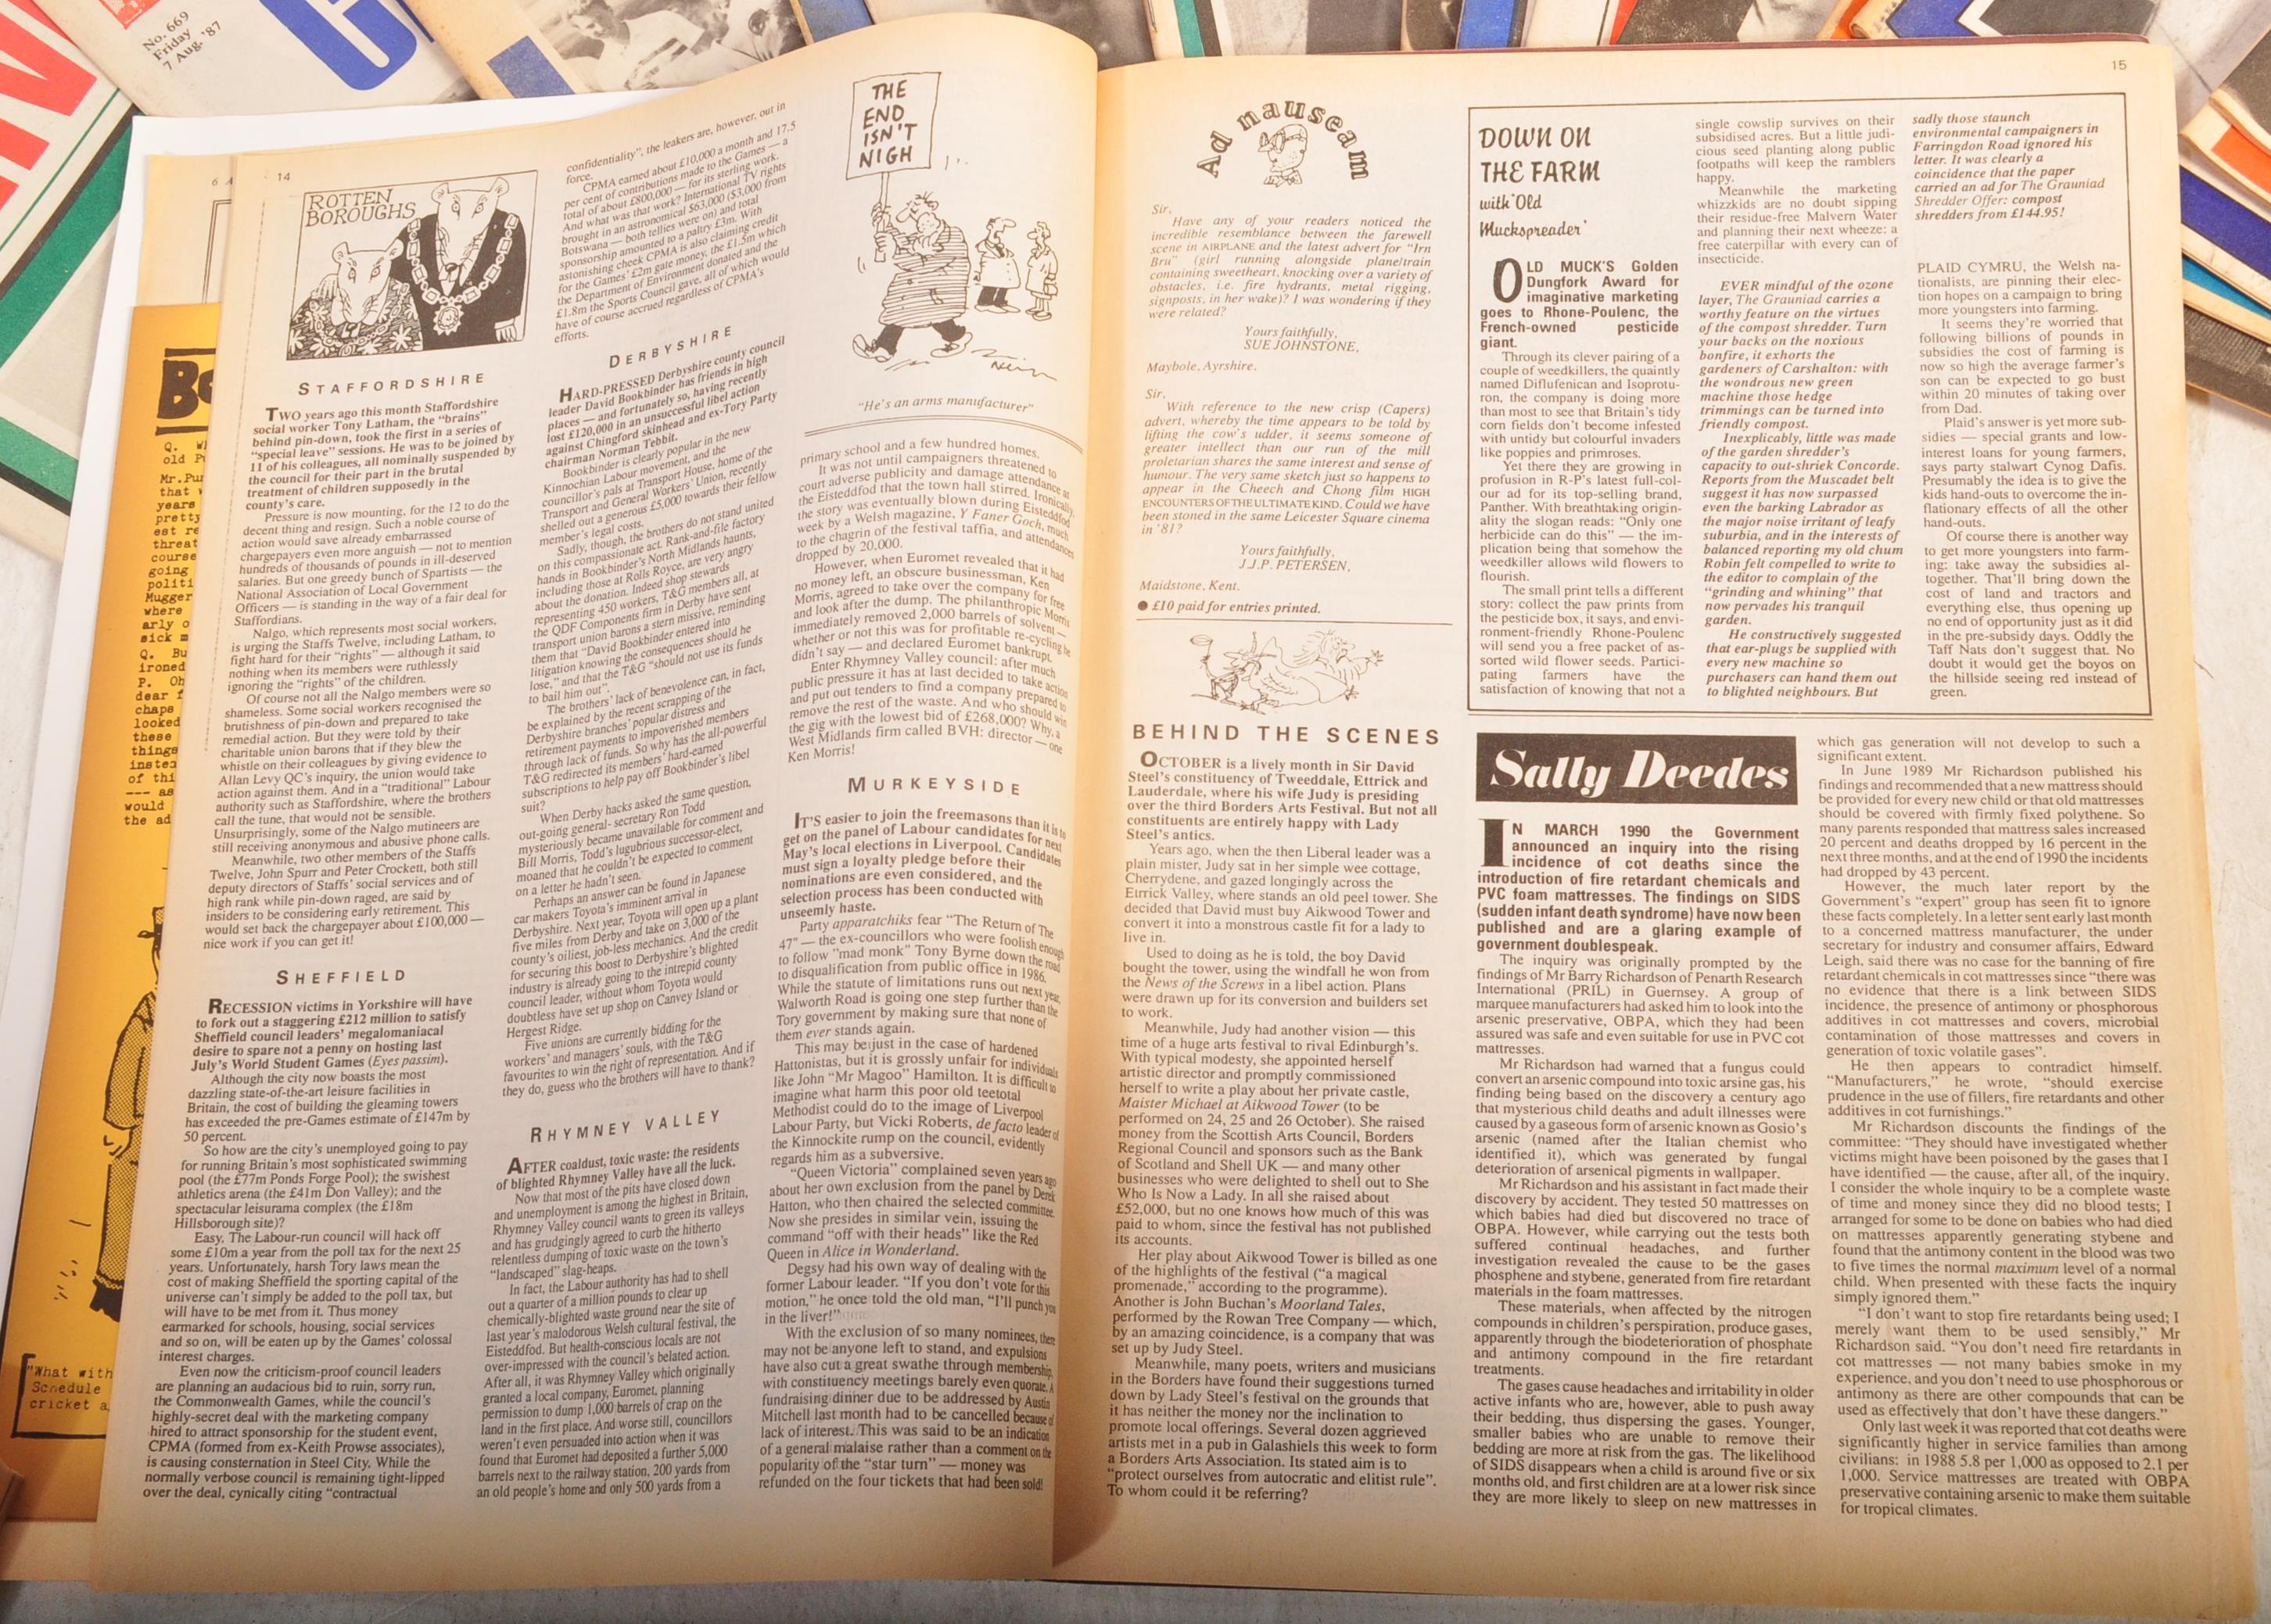 LARGE COLLECTION OF APPROV 250 VINTAGE 20TH CENTURY PRIVATE EYE MAGAZINE - Image 9 of 9